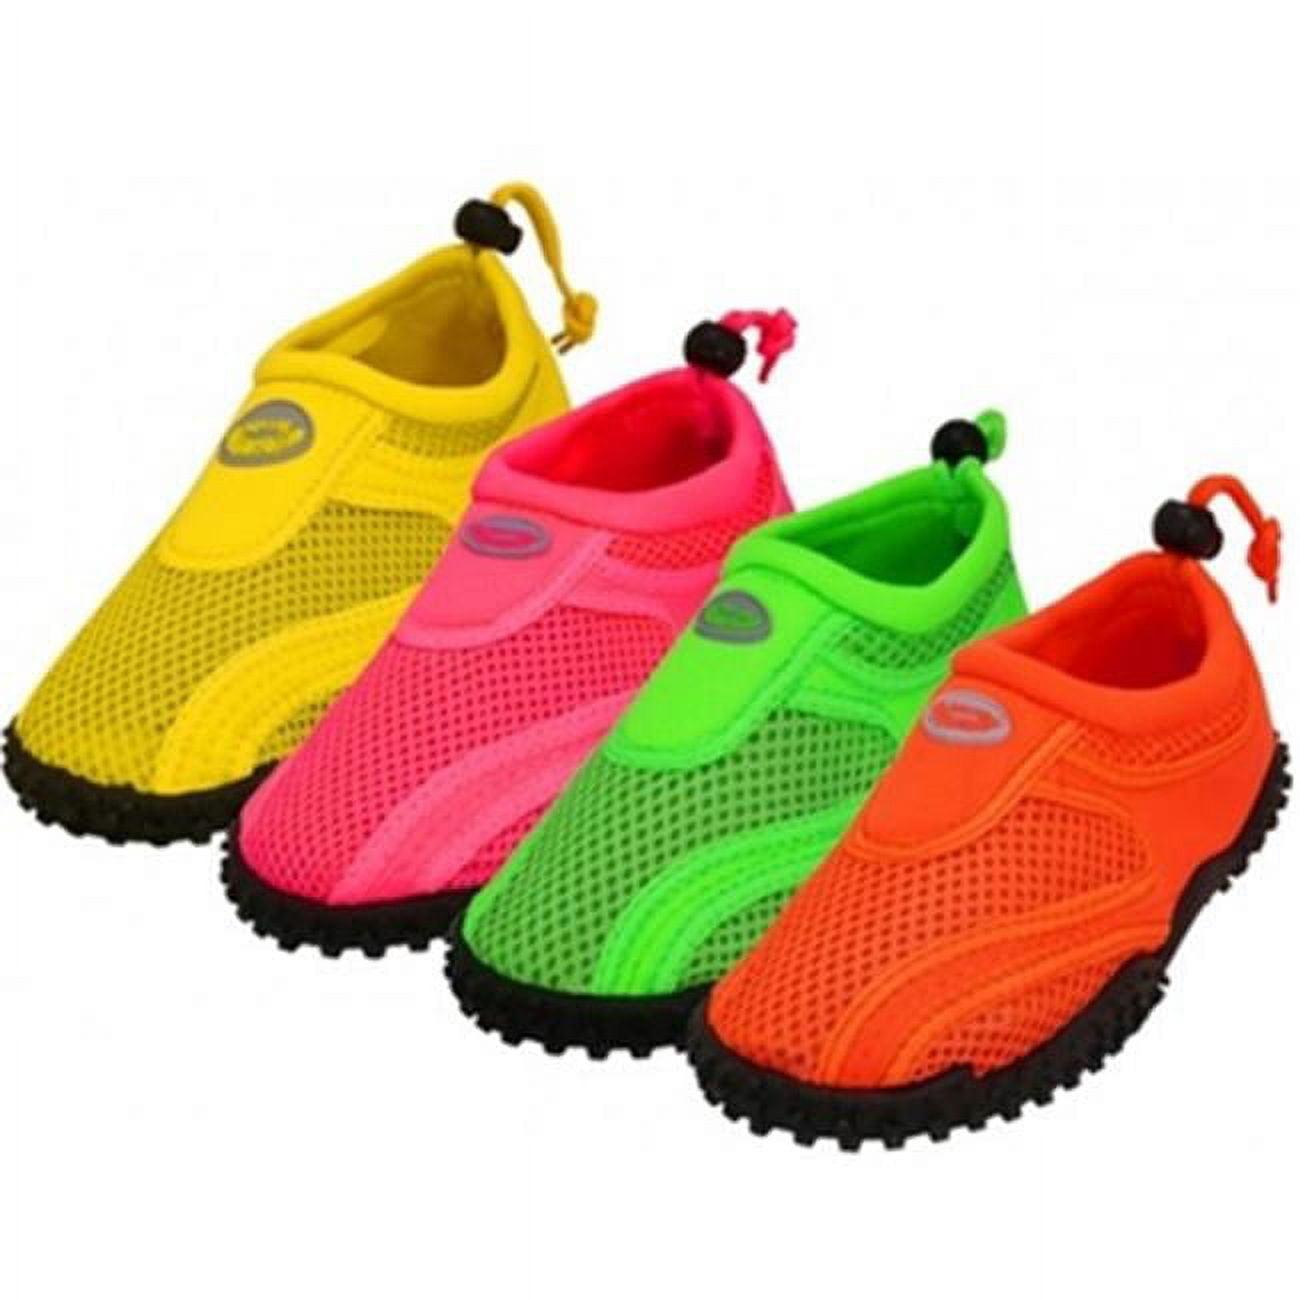 Picture of DDI 2316021 Children&apos;s Neon color Wave Water shoes (36 pairs)  Size #11-4 Case of 36